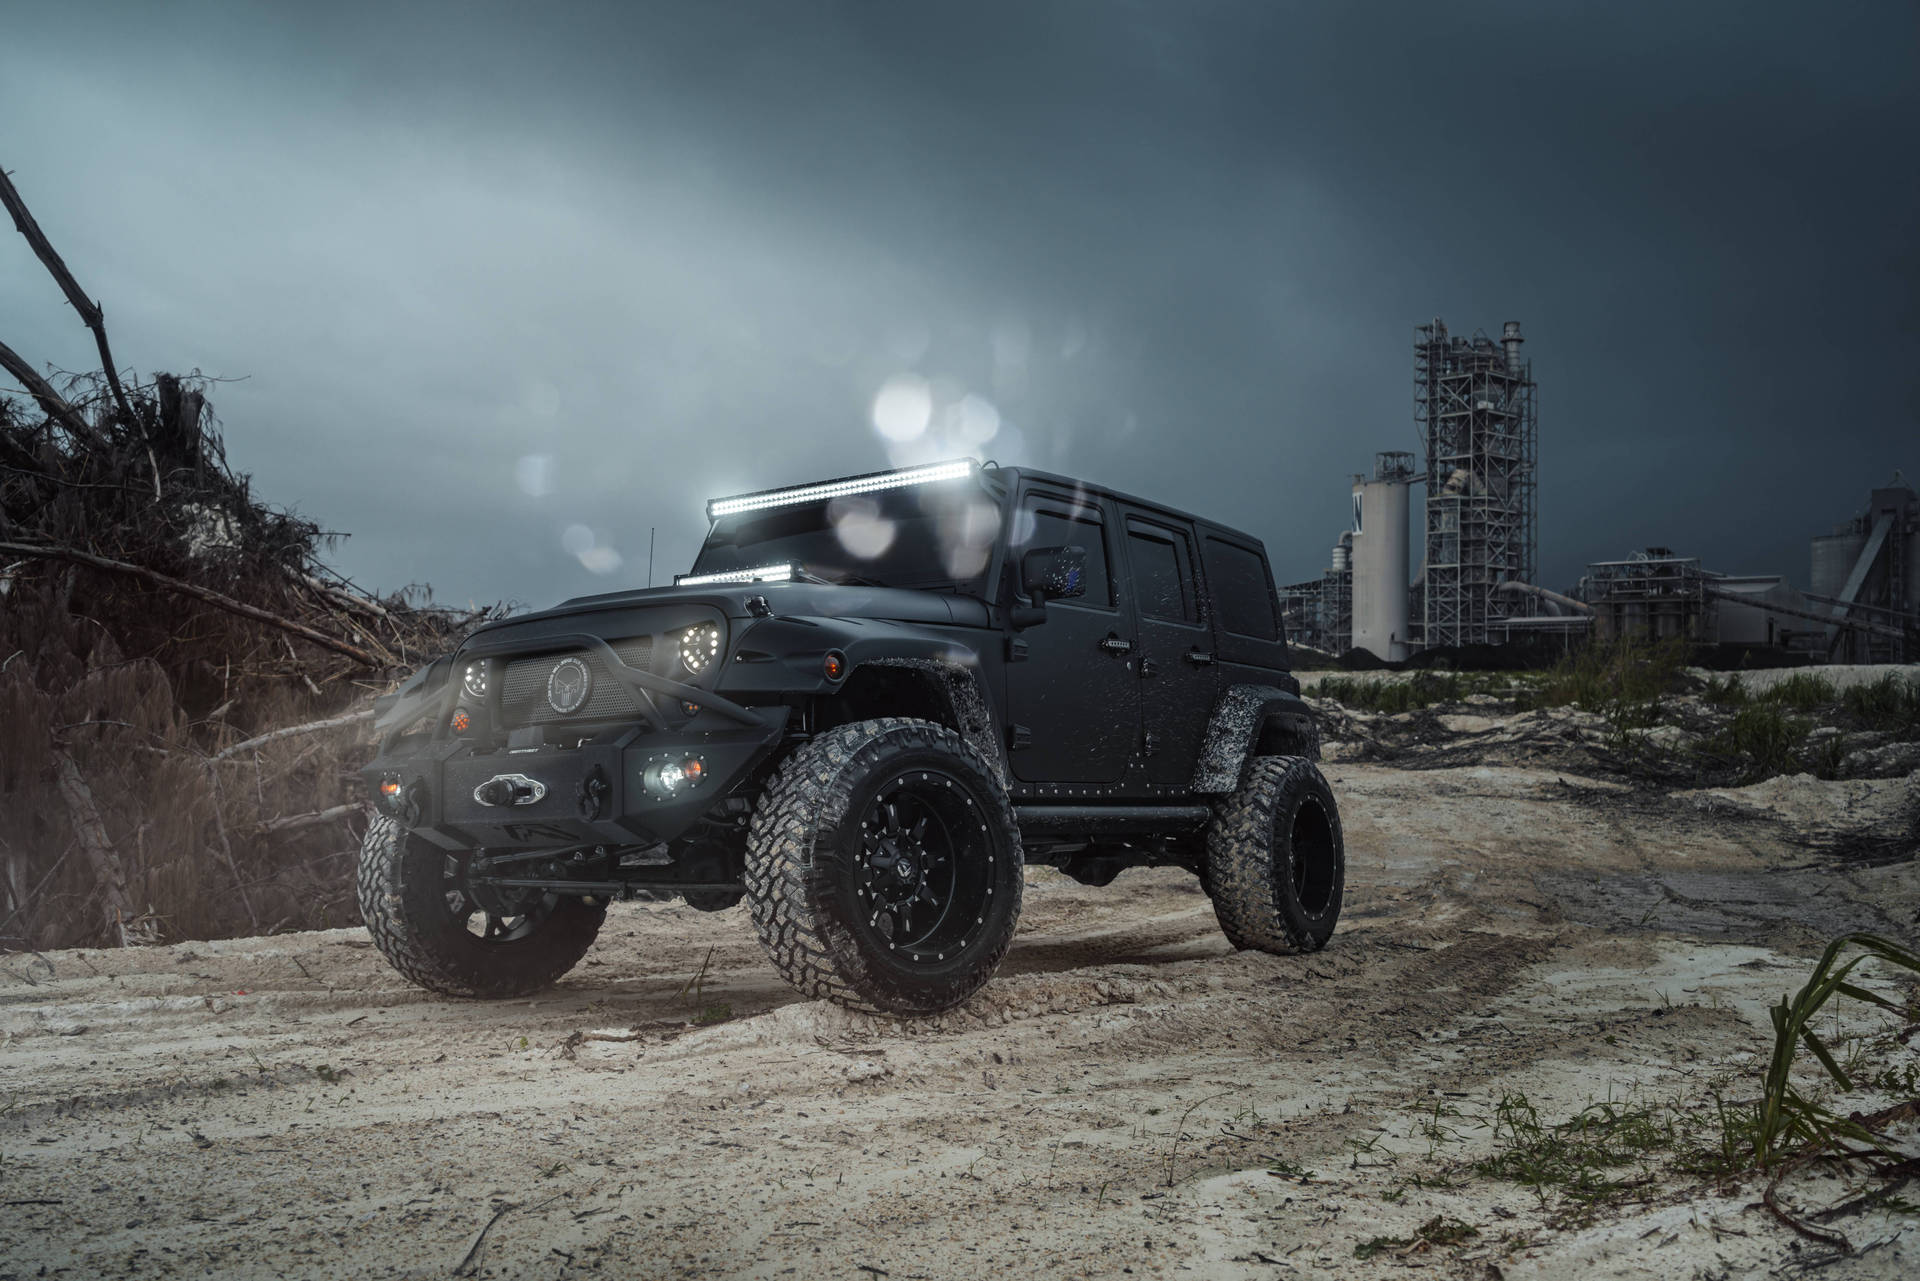 Rugged Black Jeep Wrangler In Construction Site Background